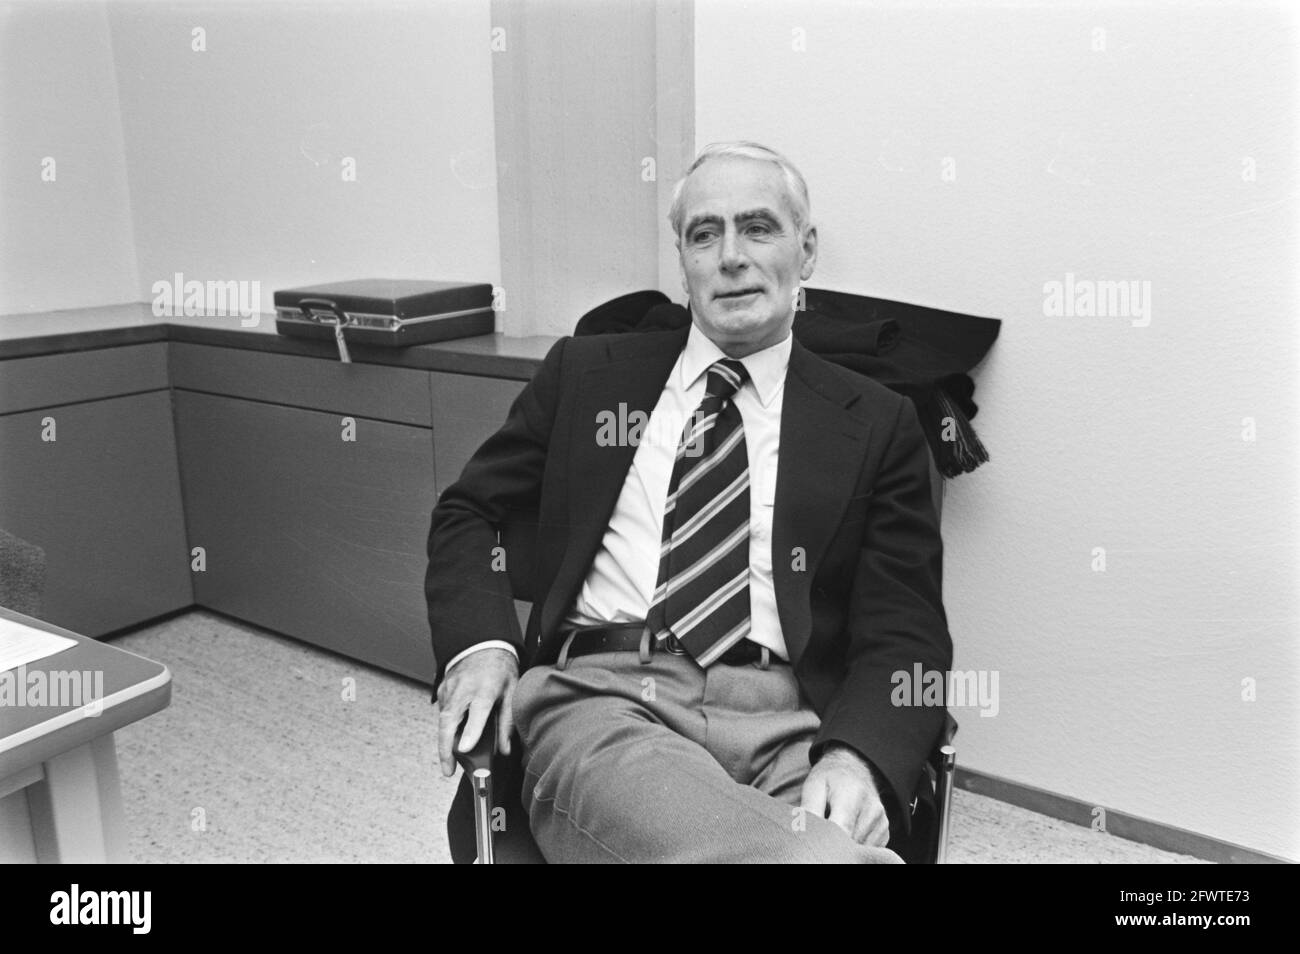 Public prosecutor mr. A. F. J. C. Habermehl, April 4, 1977, public prosecutors, war crimes, portraits, The Netherlands, 20th century press agency photo, news to remember, documentary, historic photography 1945-1990, visual stories, human history of the Twentieth Century, capturing moments in time Stock Photo